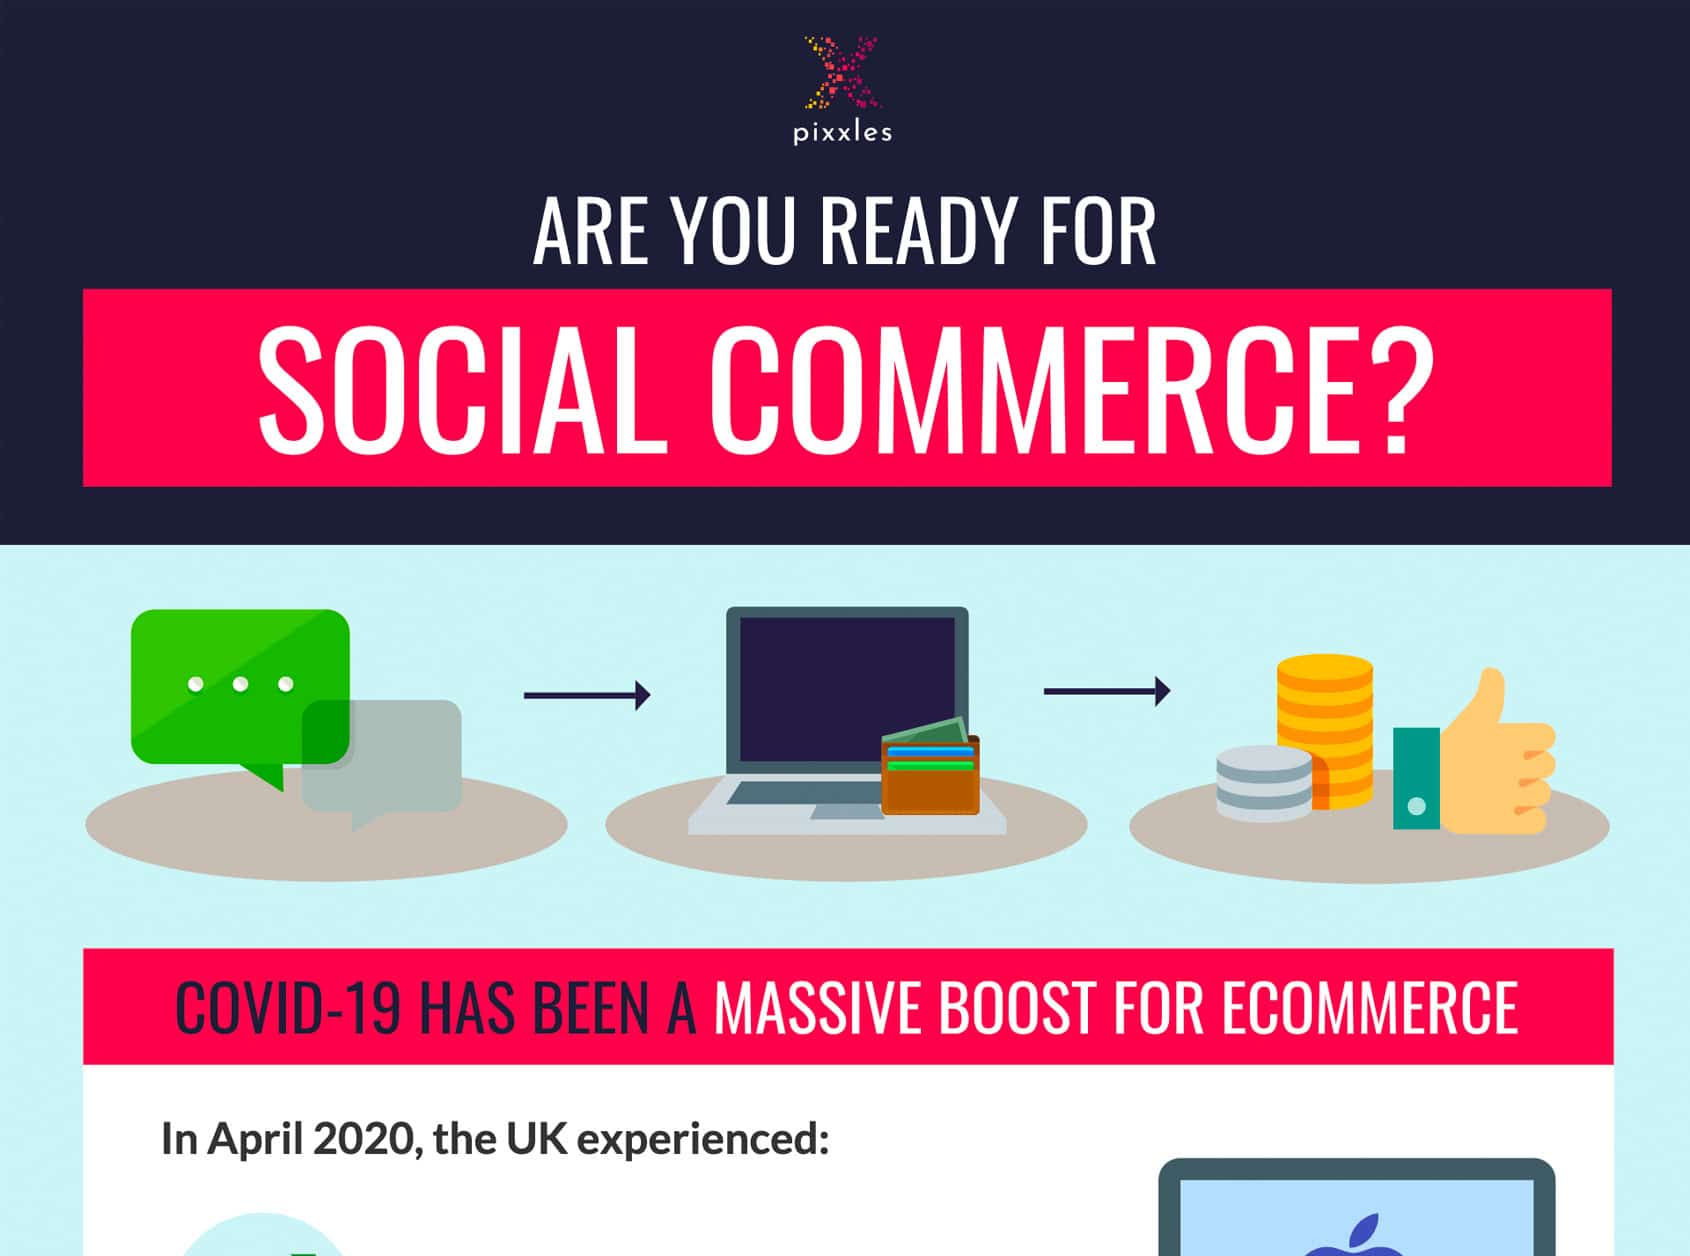 The Rise of Social Commerce During COVID-19